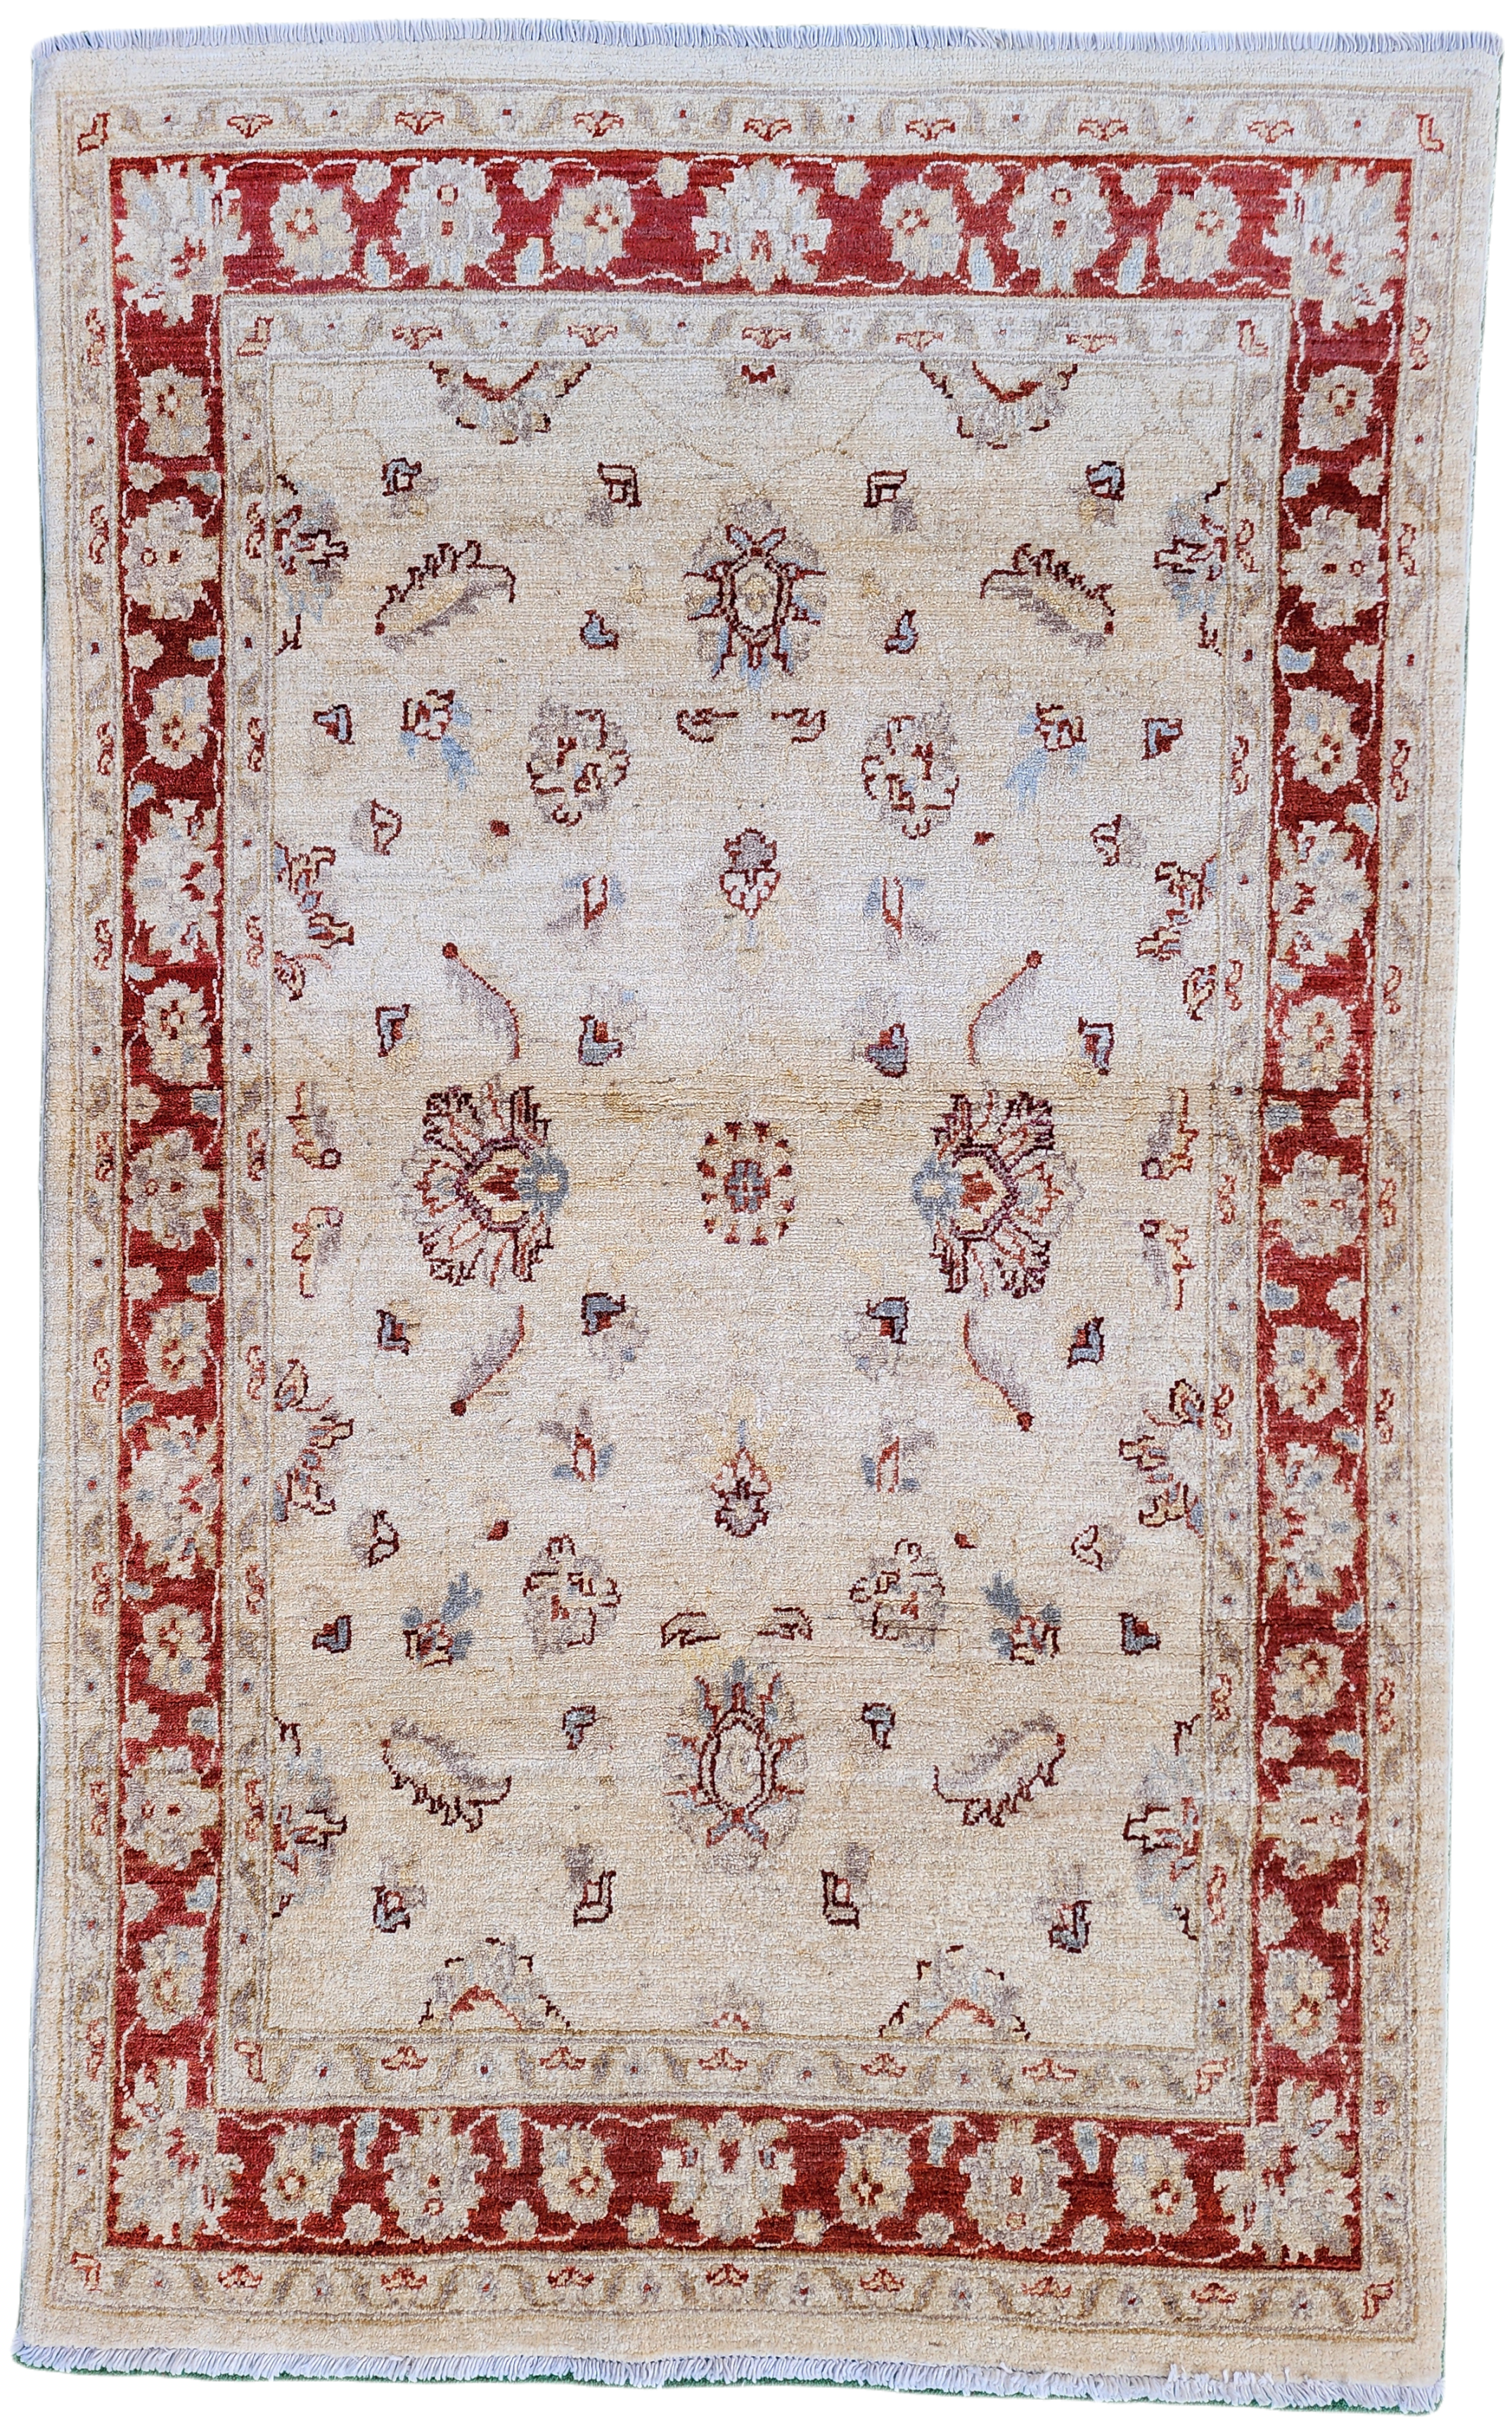 Turkish Oushak Rug 6 ft x 4 ft Red and Beige Fie Wool Rug